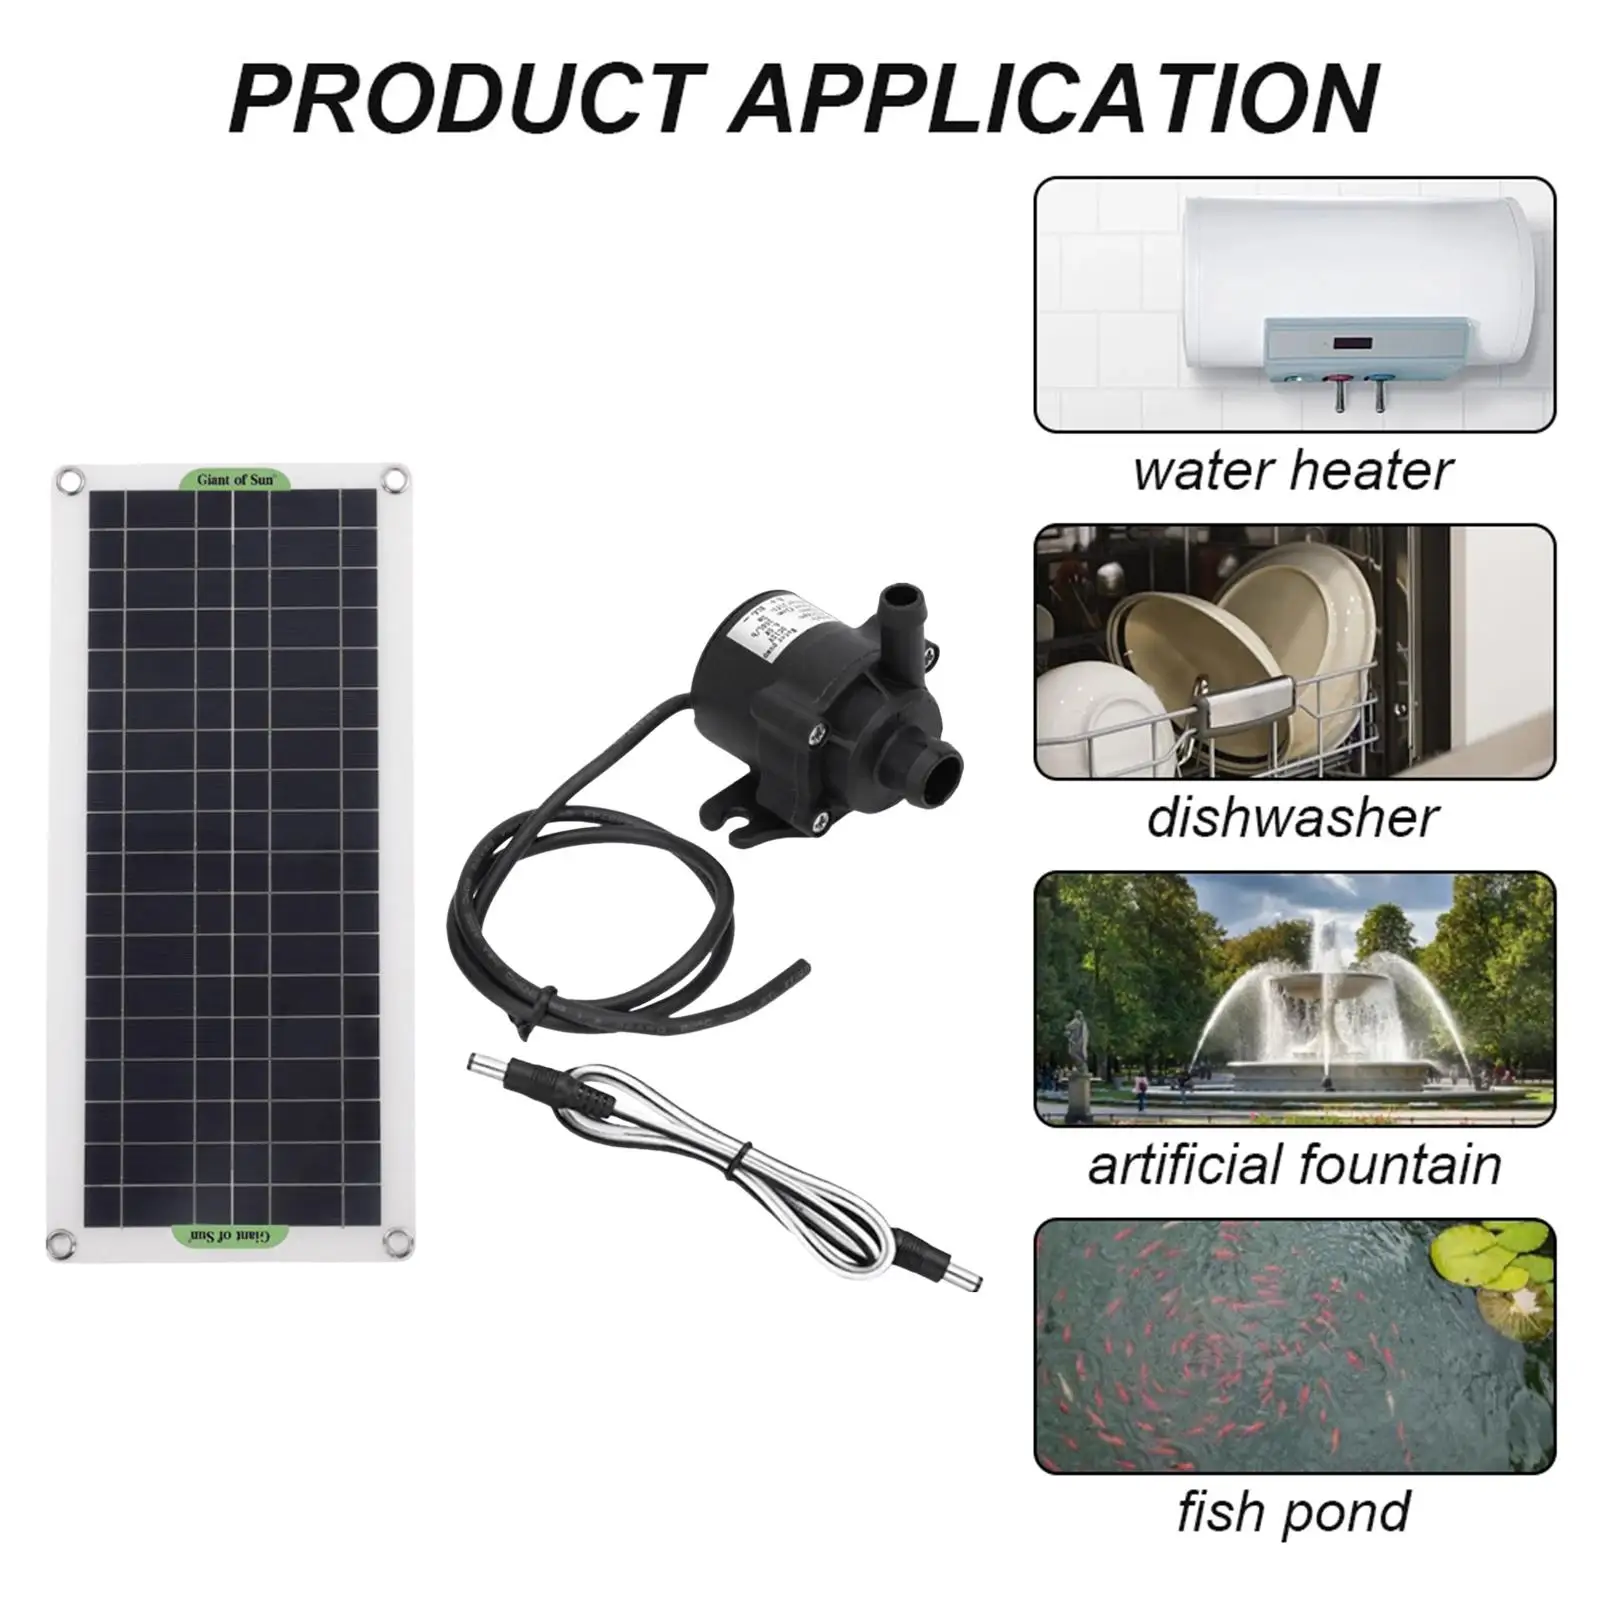 Solar Water Pump Watering Pond Pump 50W Solar Panel Continuous Work Solar Power Fountain Pump for Fish Tank DIY Water Feature